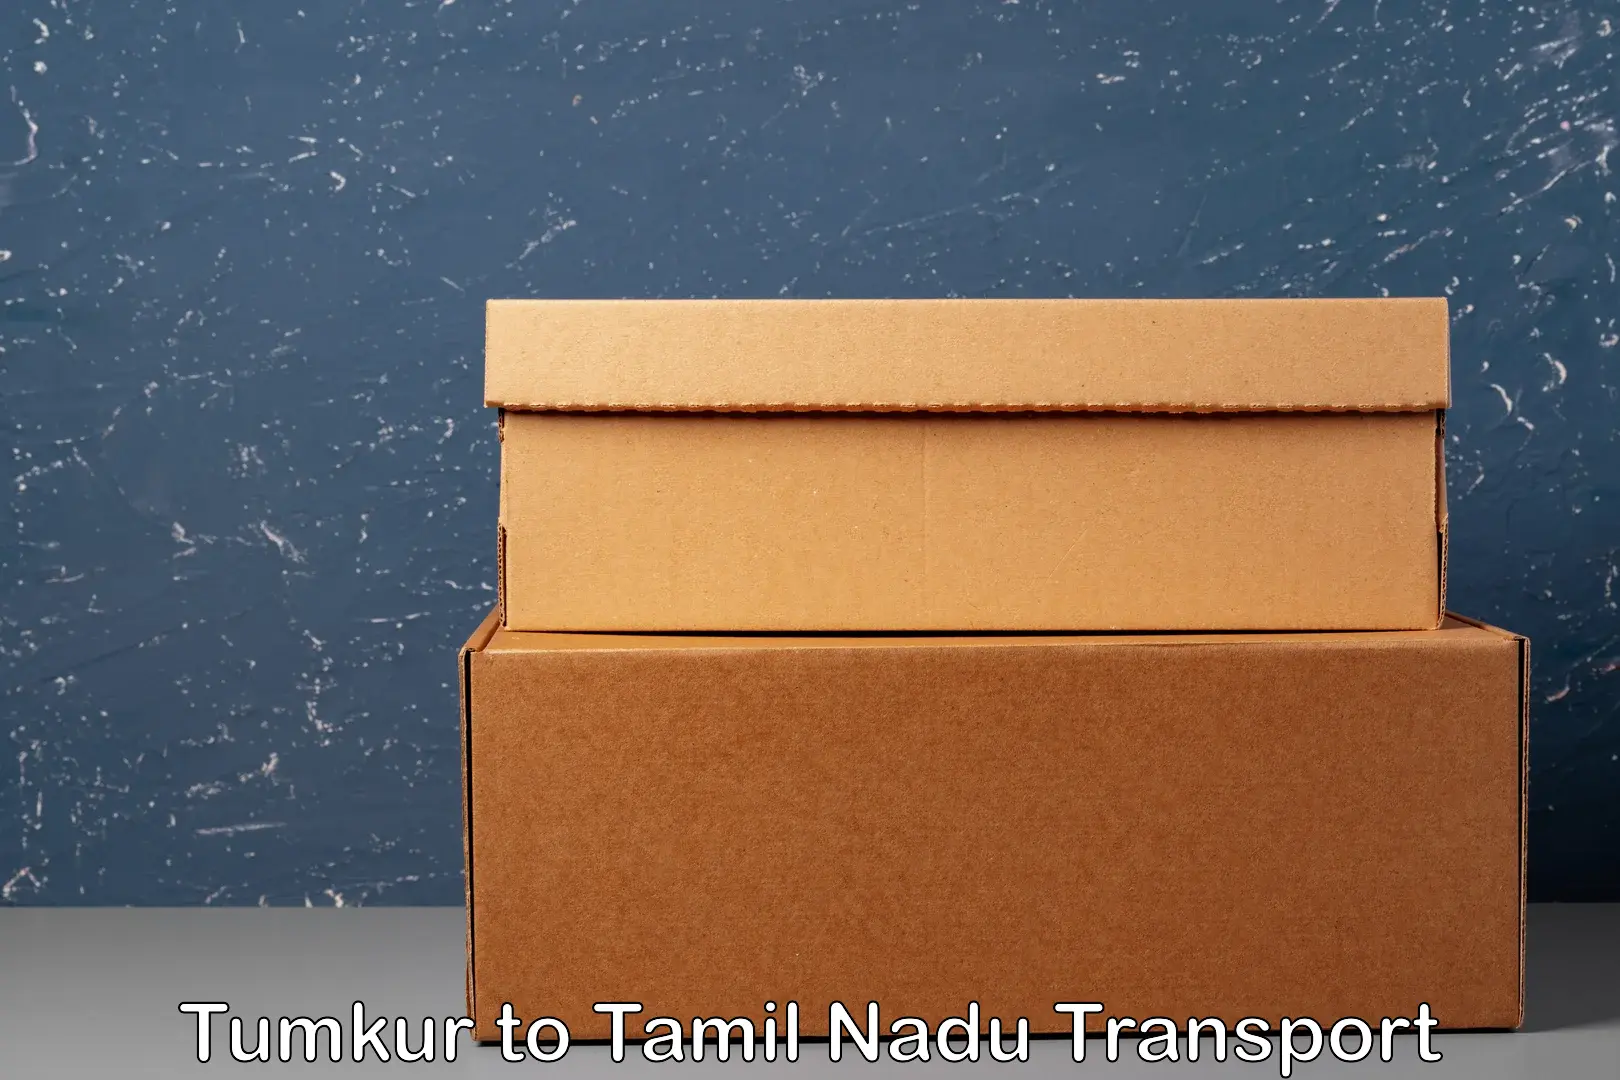 Best transport services in India Tumkur to Pollachi